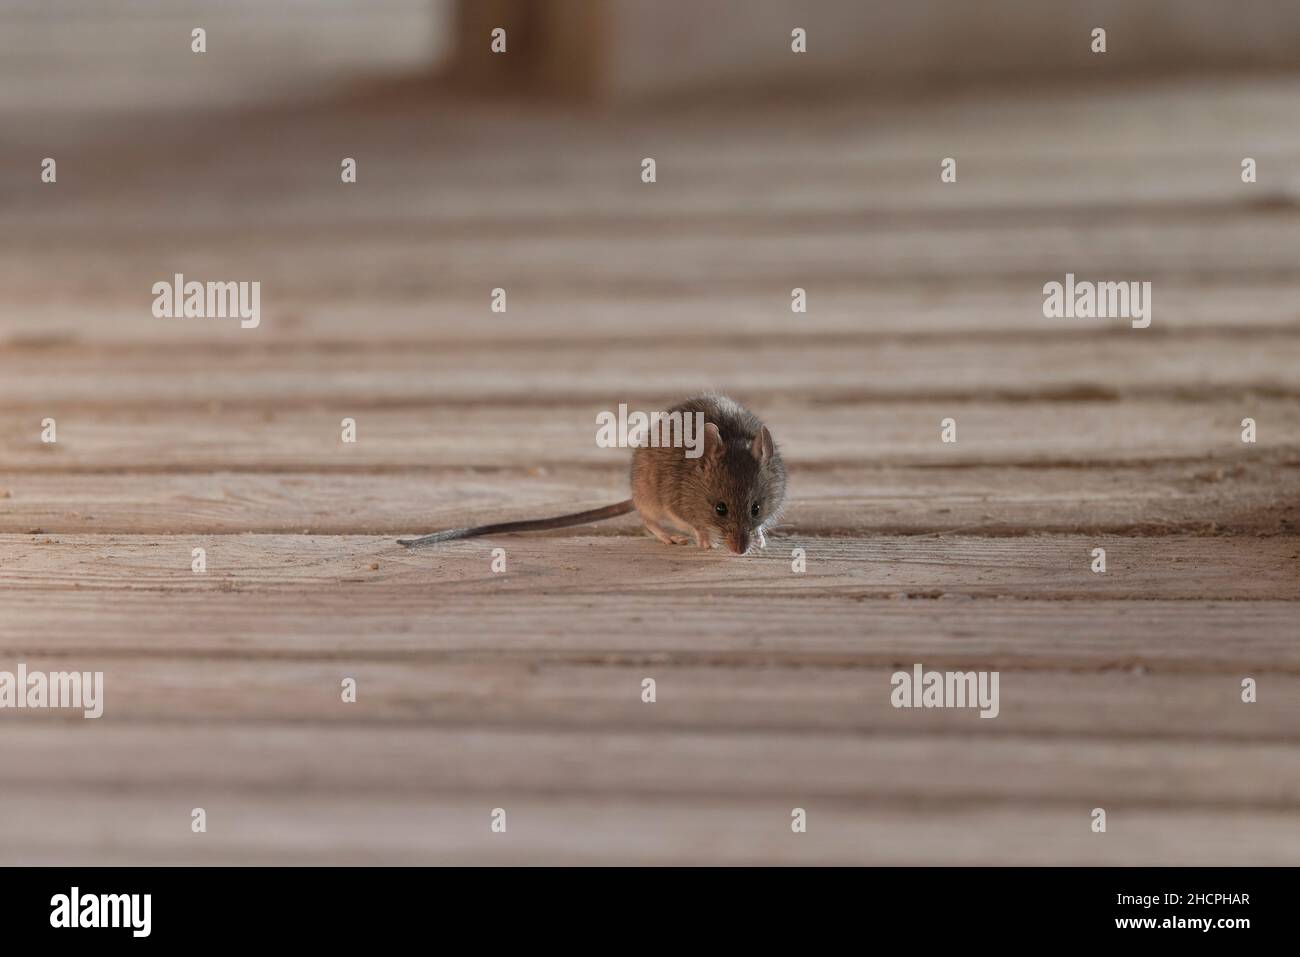 Common mouse Mus musculus on wooden planks Stock Photo